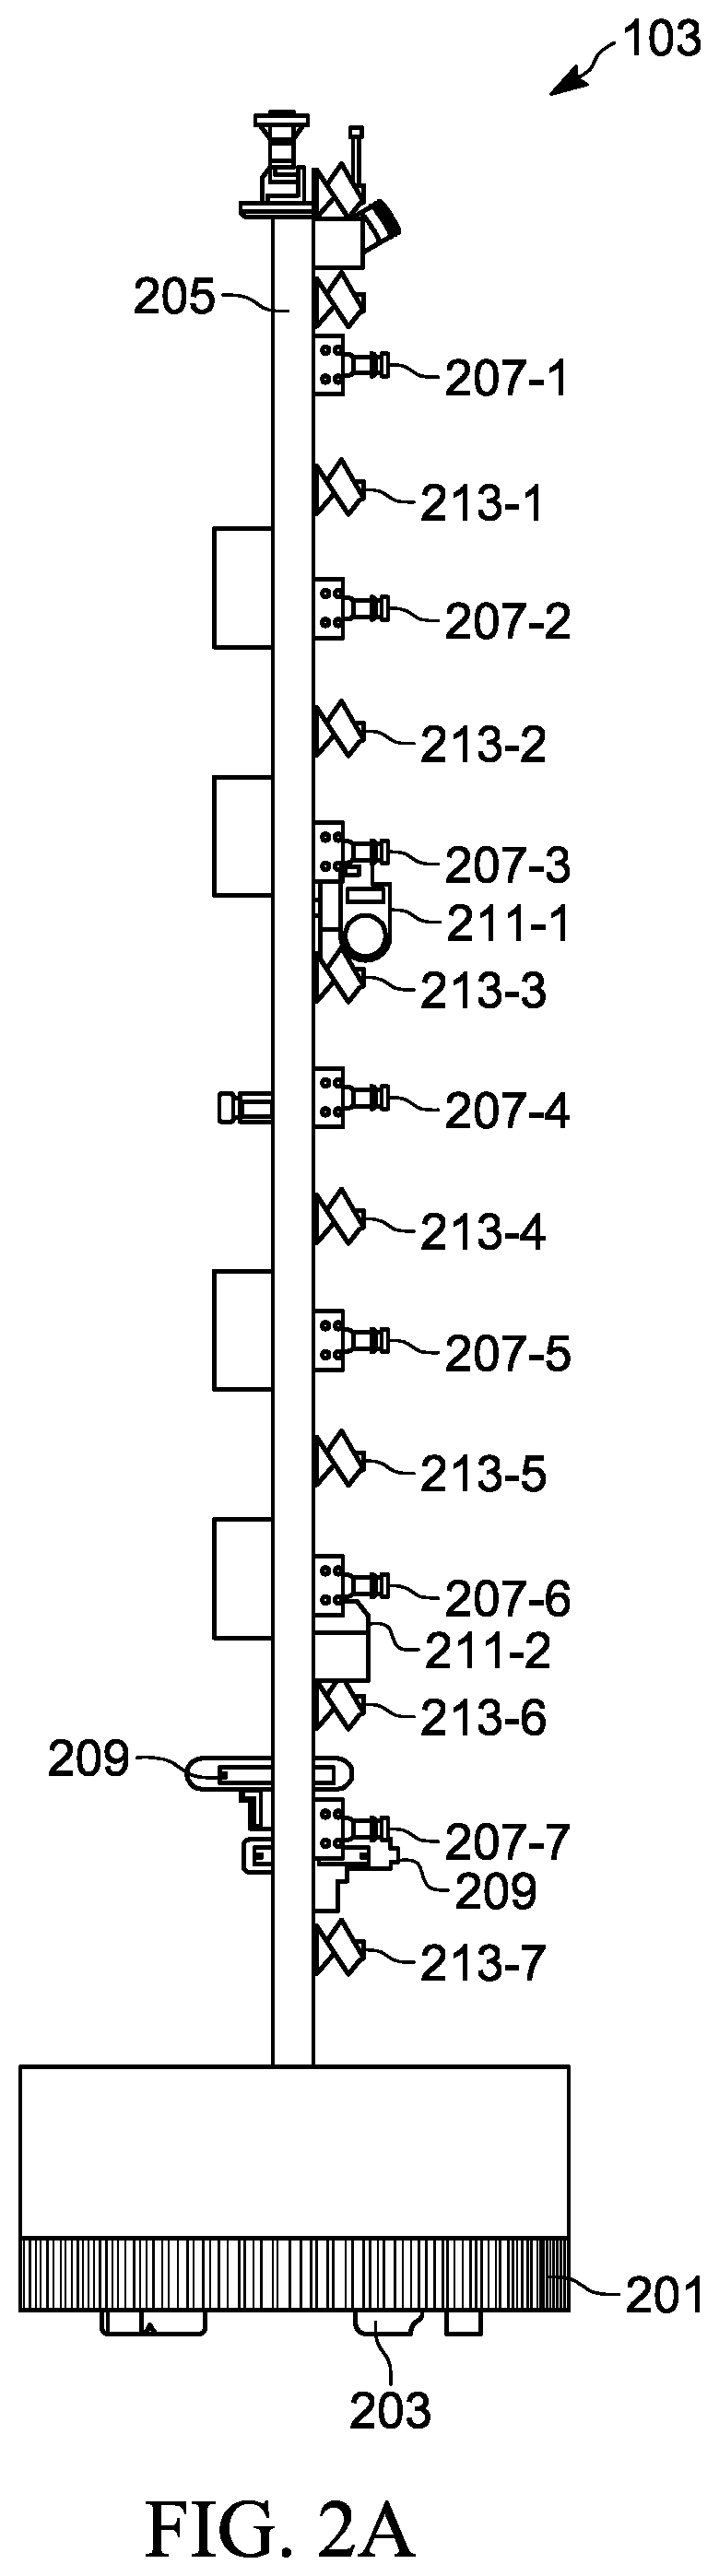 Method, system and apparatus for auxiliary label detection and association